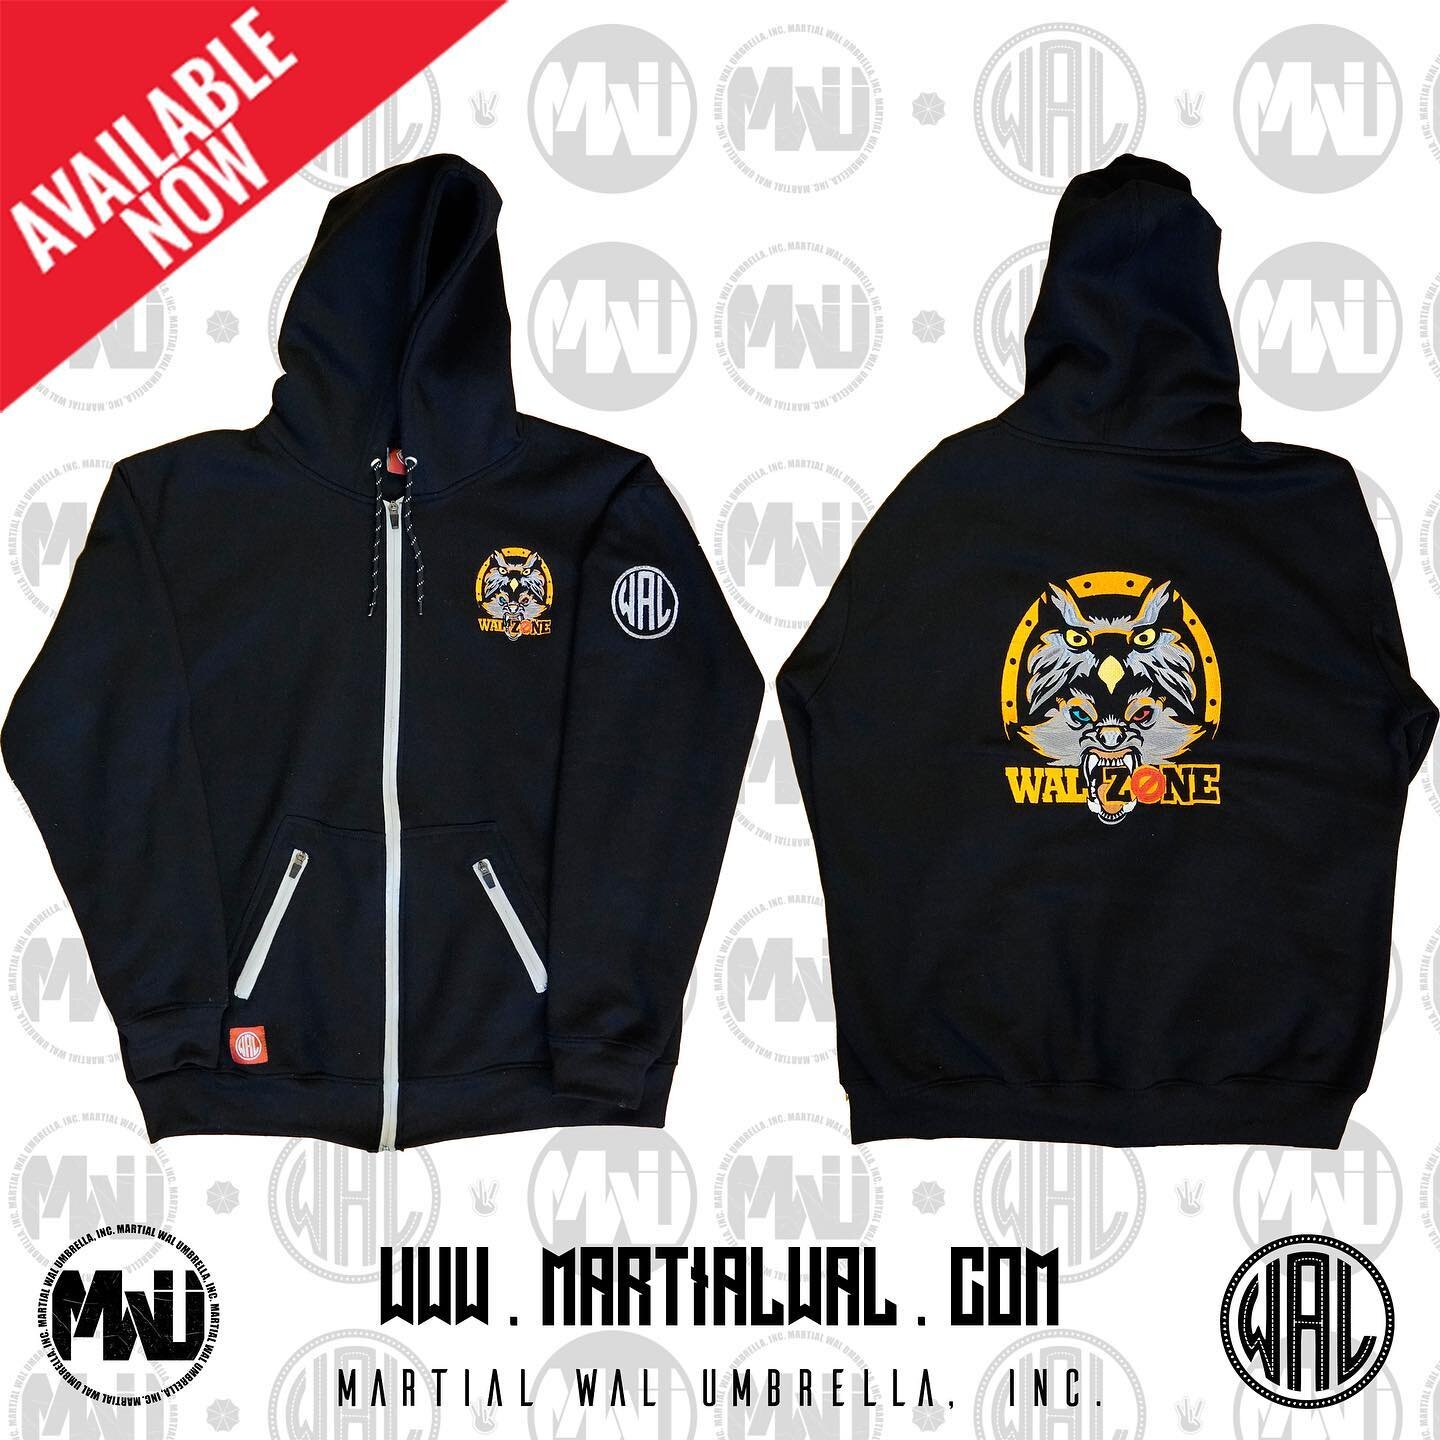 👈🏾SWIPE LEFT👈🏾
🏷NEW RELEASE🏷
TO PURCHASE @MartialWAL APPAREL GO TO https://martialwal.com/wal-apparel  WE SHIP NATIONWIDE  SHIPPING &amp; HANDLING CHARGES MAY APPLY  THANK YOU FOR THE CONTINUED SUPPORT OF THE MARTIAL WAL UMBRELLA BRAND 

#WALup